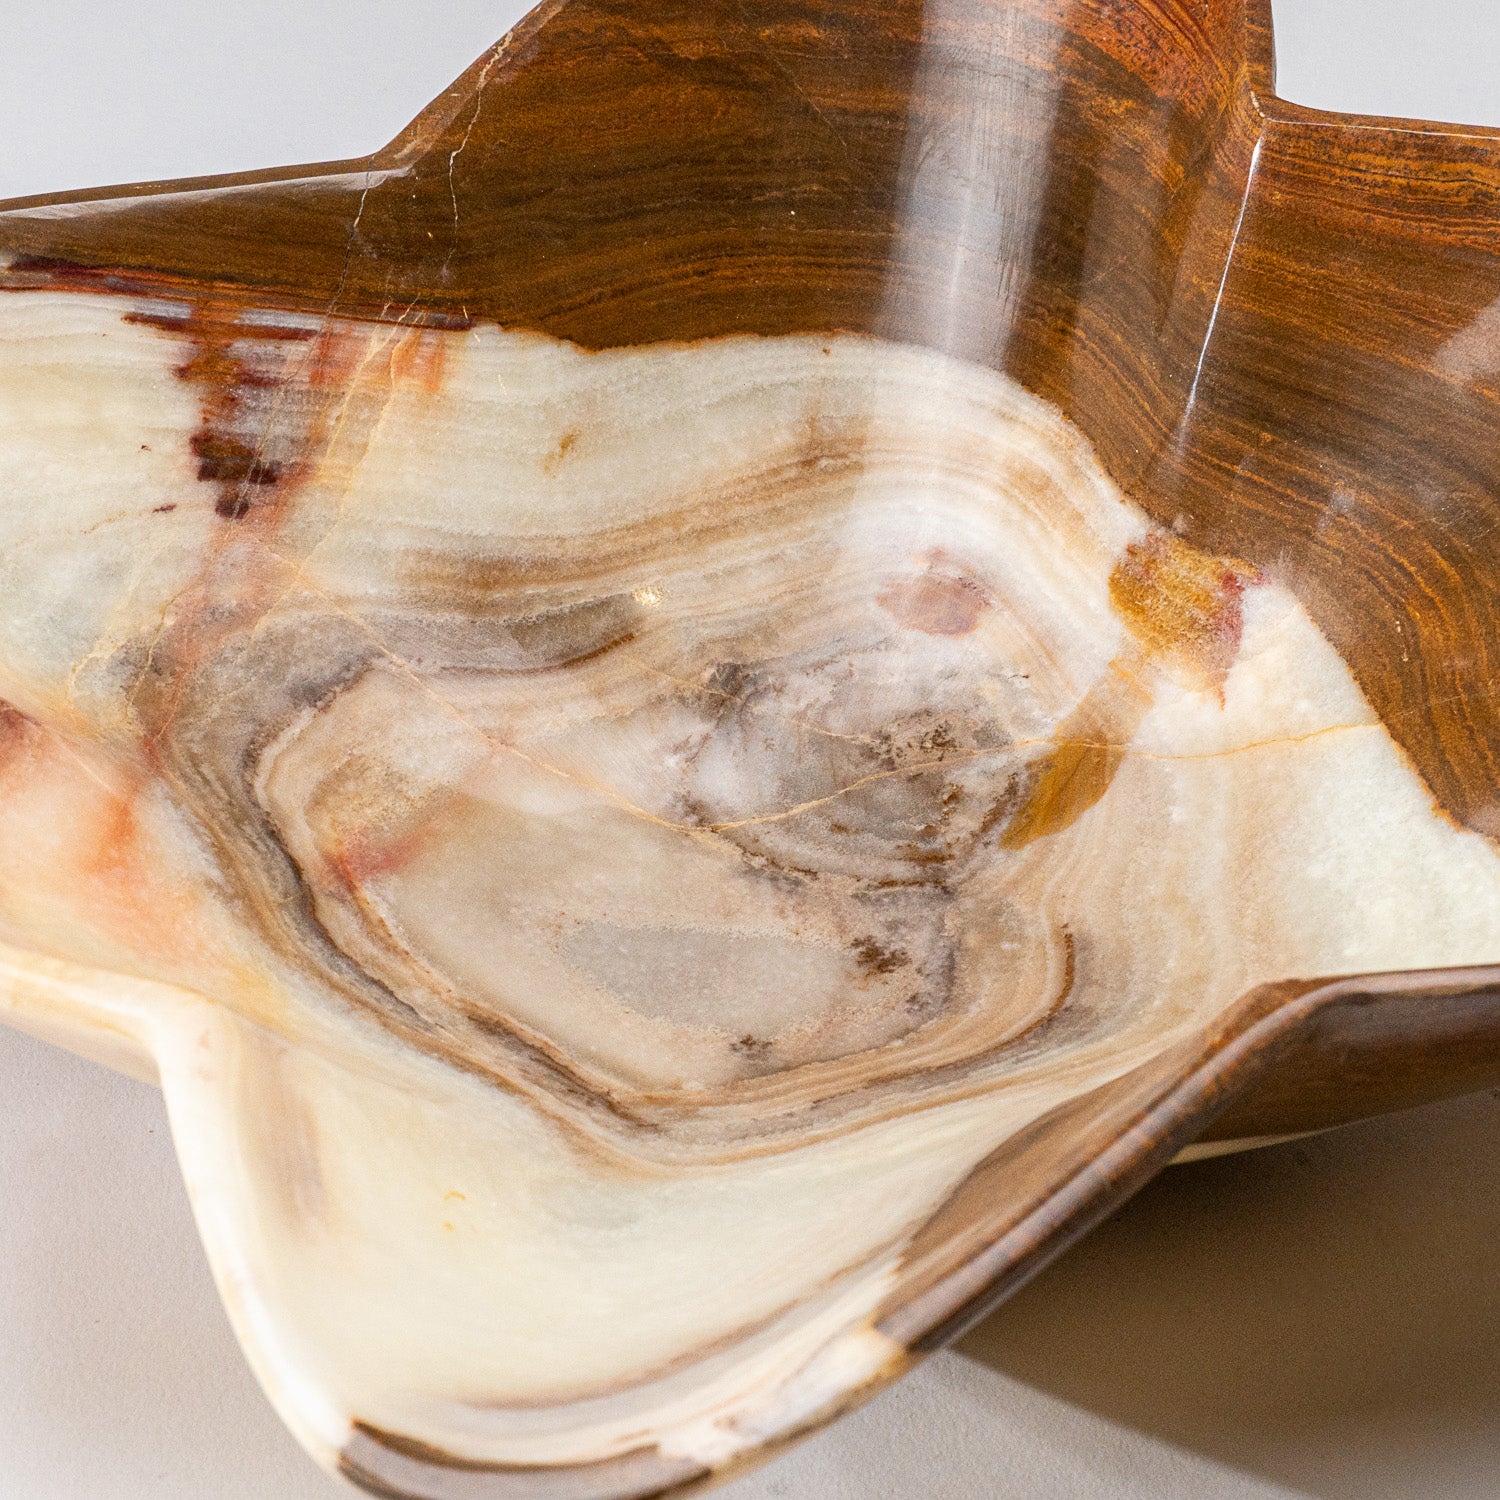 Genuine Polished Brown and White Onyx Bowl from Pakistan (7.4 lbs)